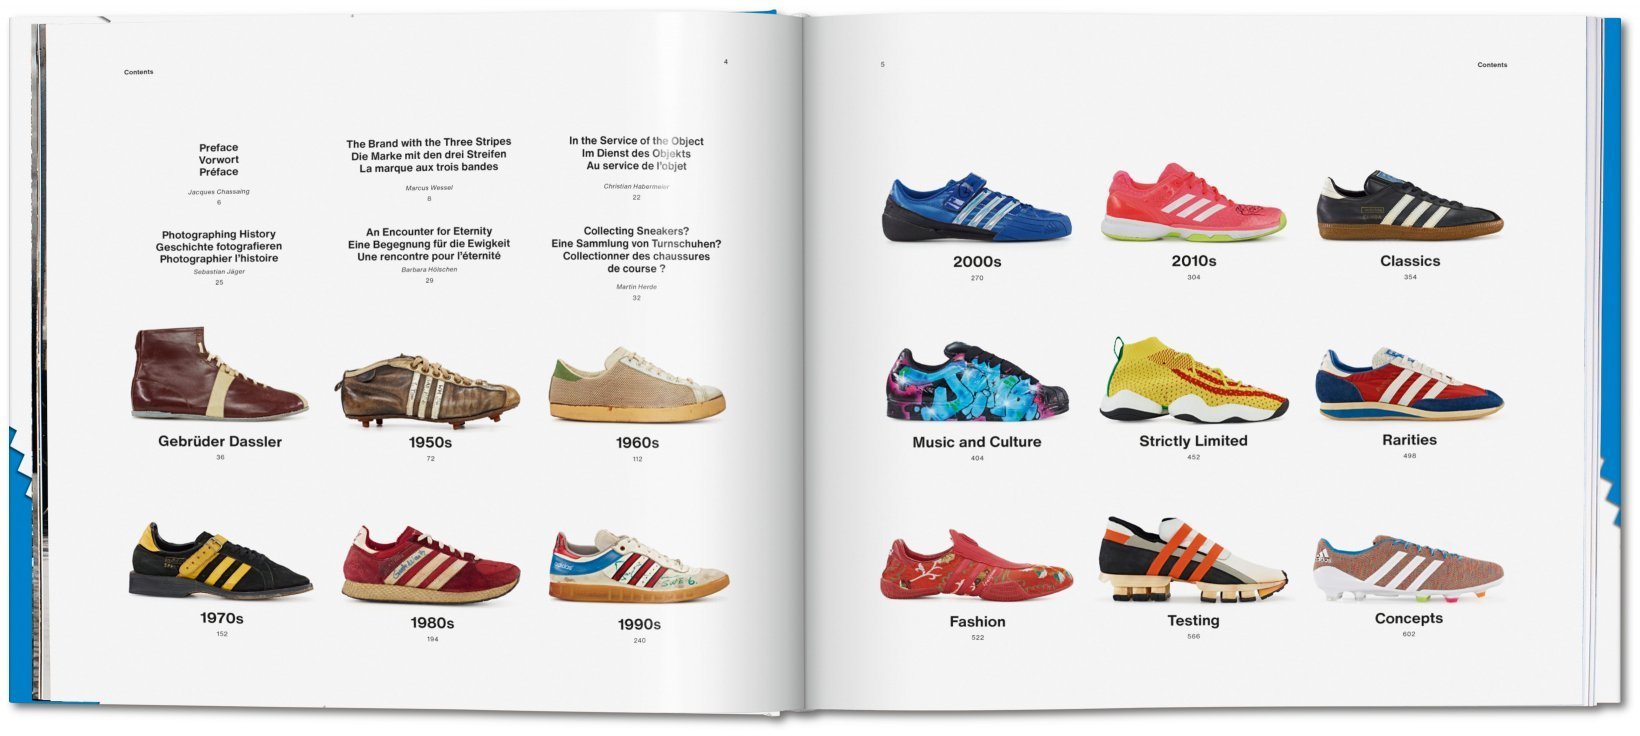 adidas_archive_xl_int_open001_004_005_04687_2001131117_id_1286184